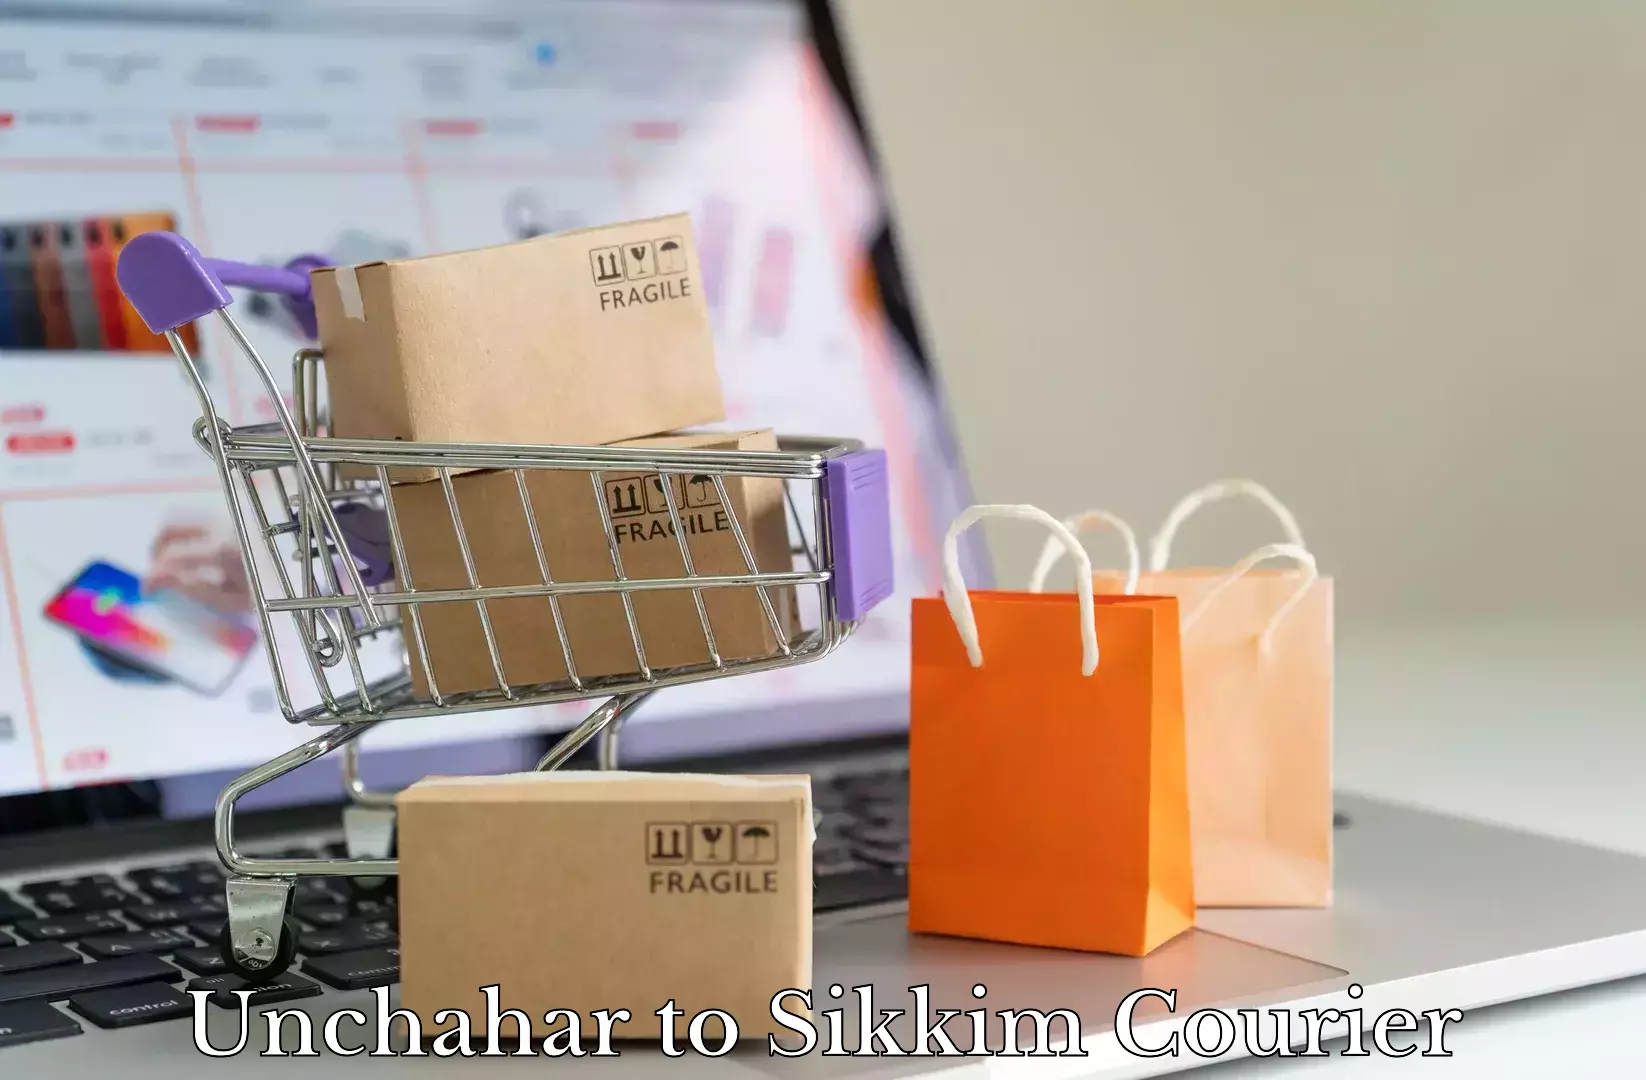 Efficient moving strategies Unchahar to Sikkim